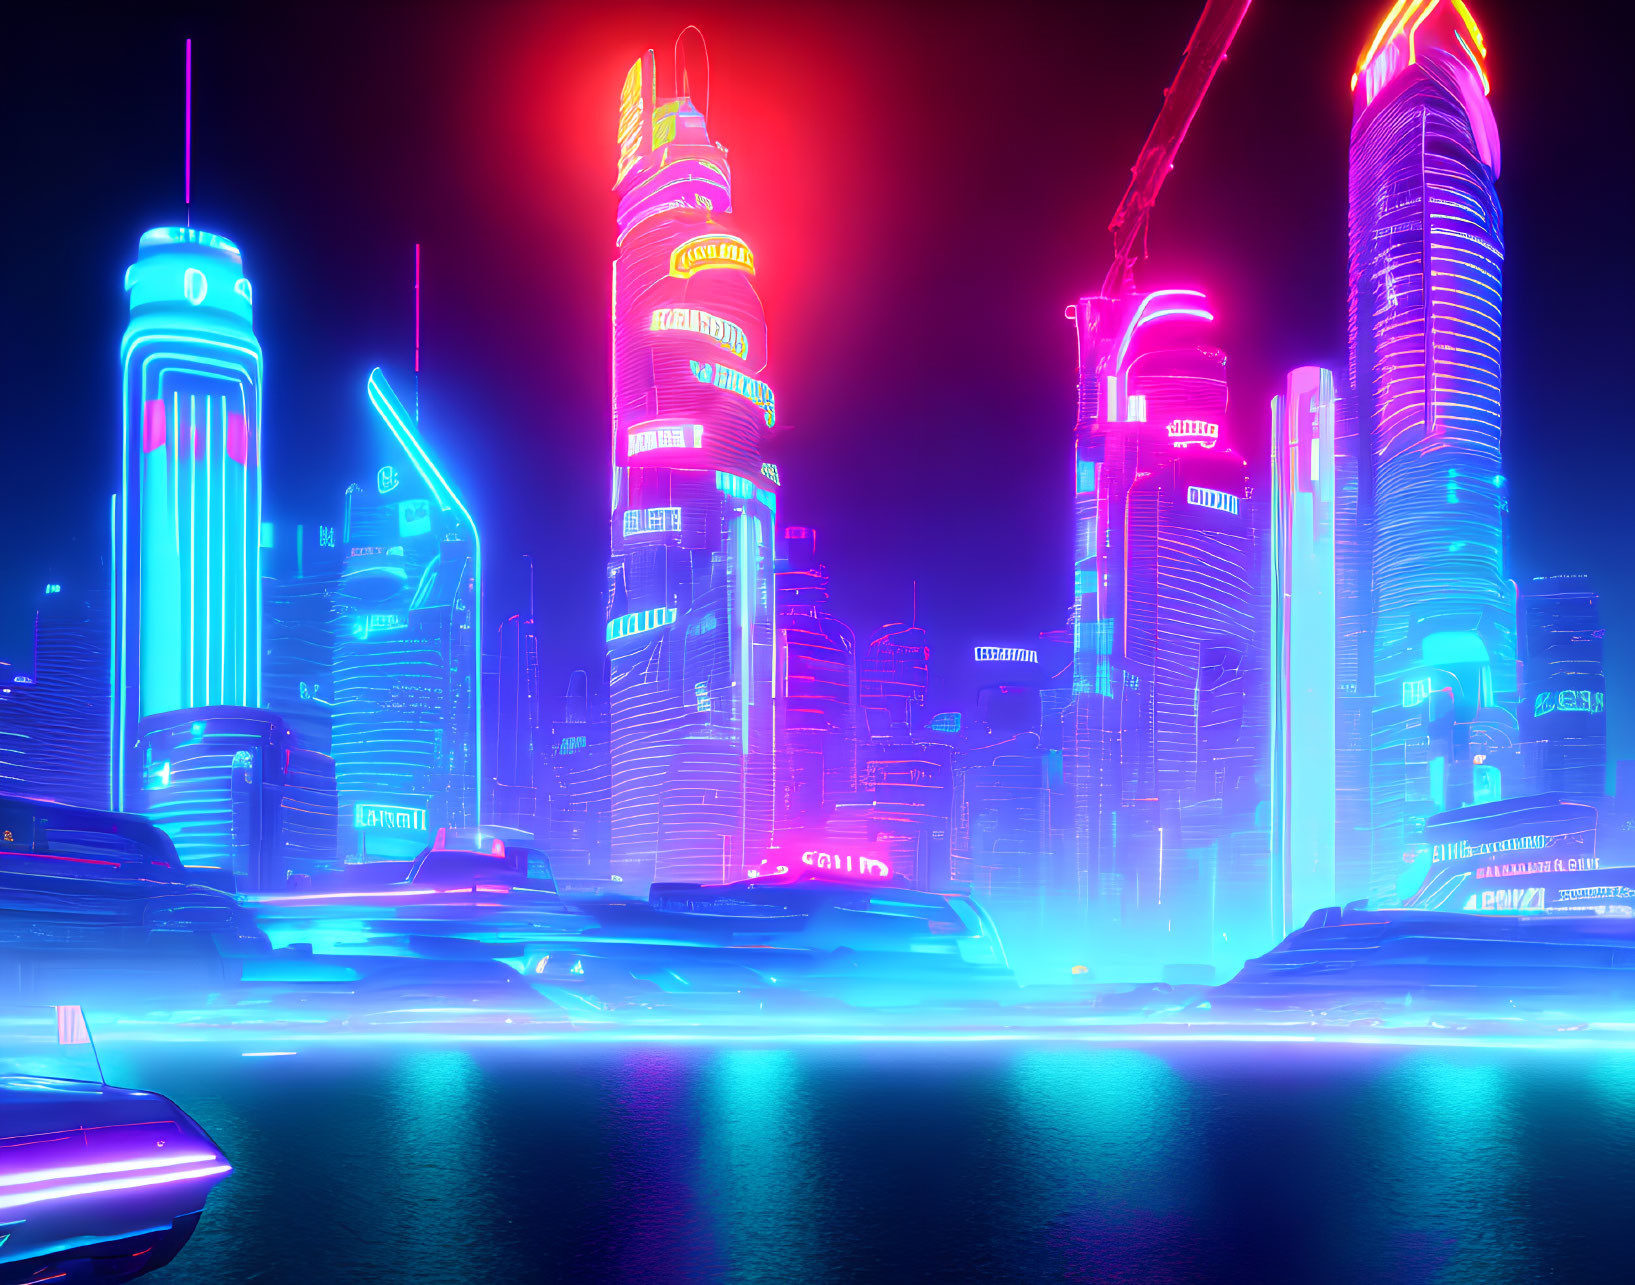 Neon-lit skyscrapers and flying cars in futuristic cityscape